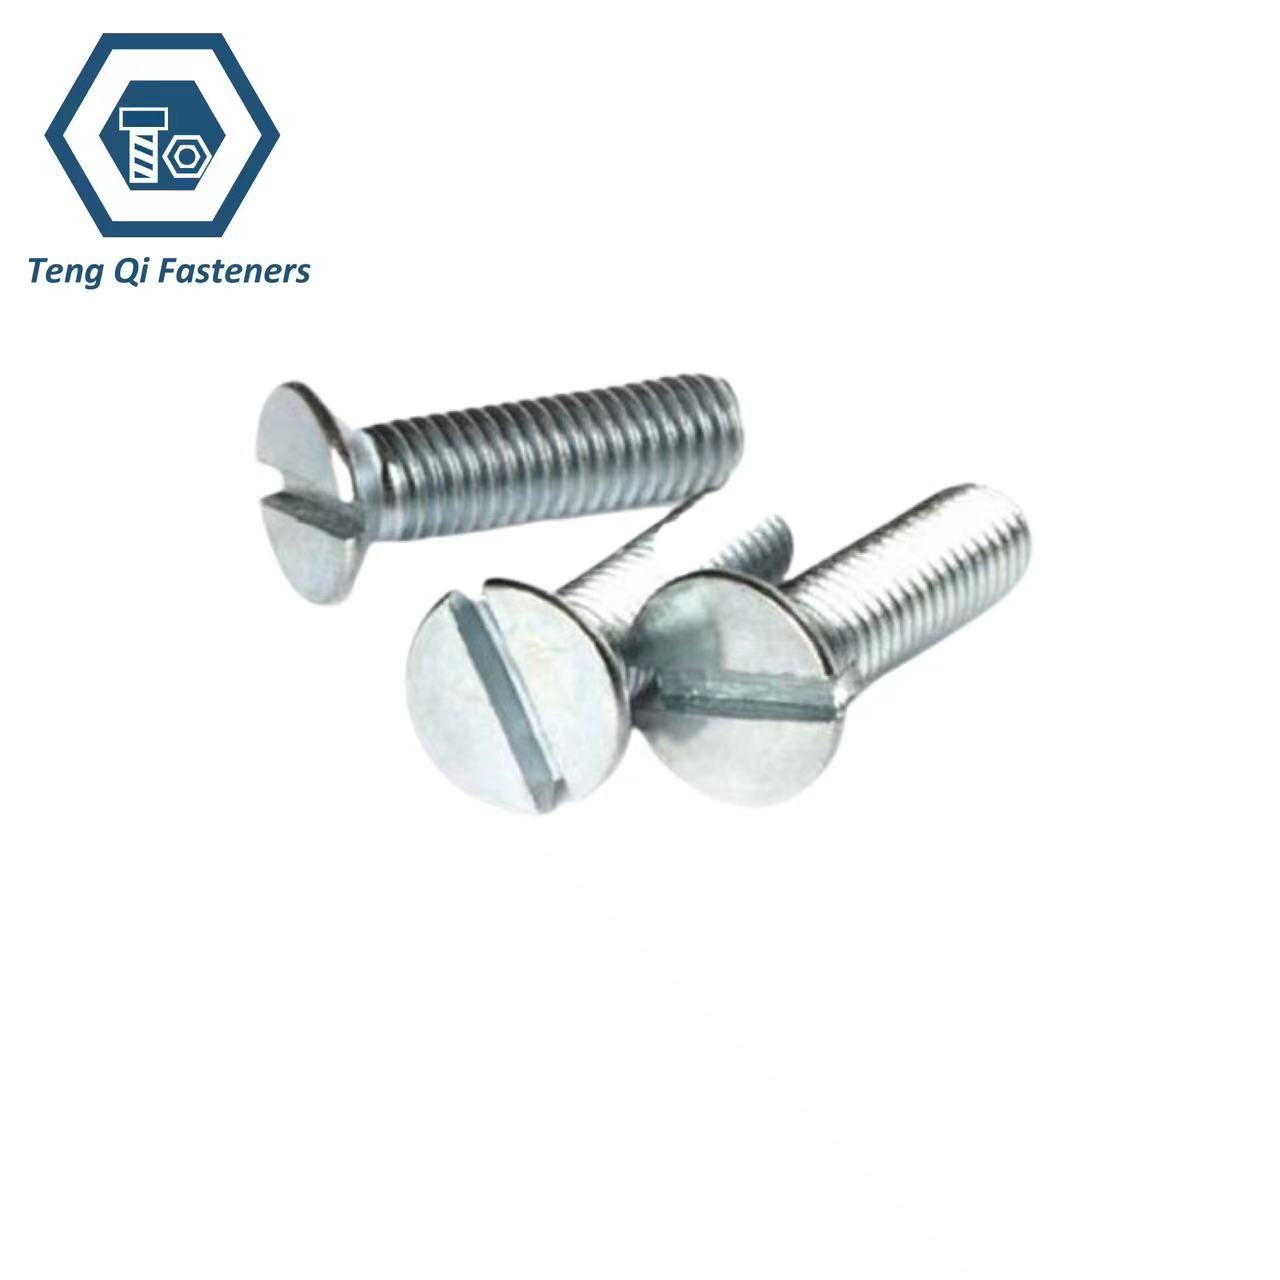 Steel American Standard ASME B18.5 Zinc Plated 80°Slotted countersunk Head Bolts